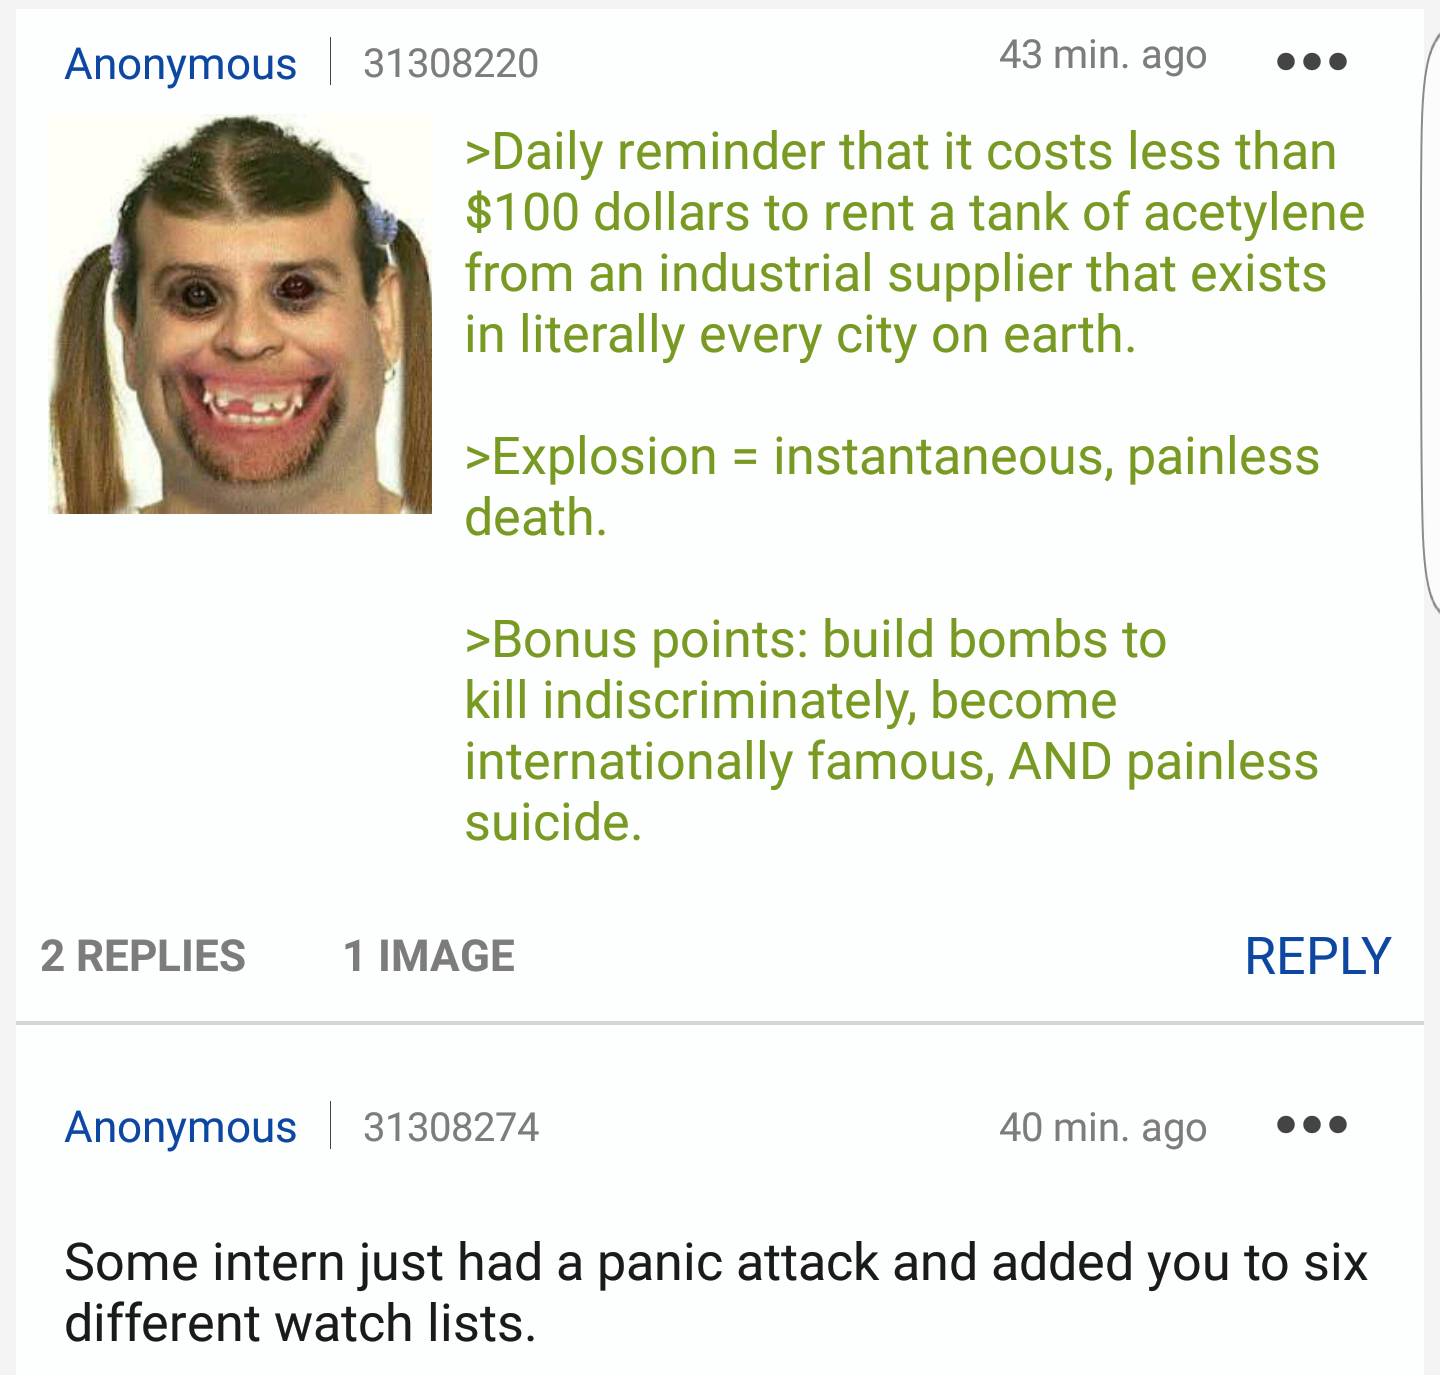 /r9k/ goes out with a bang